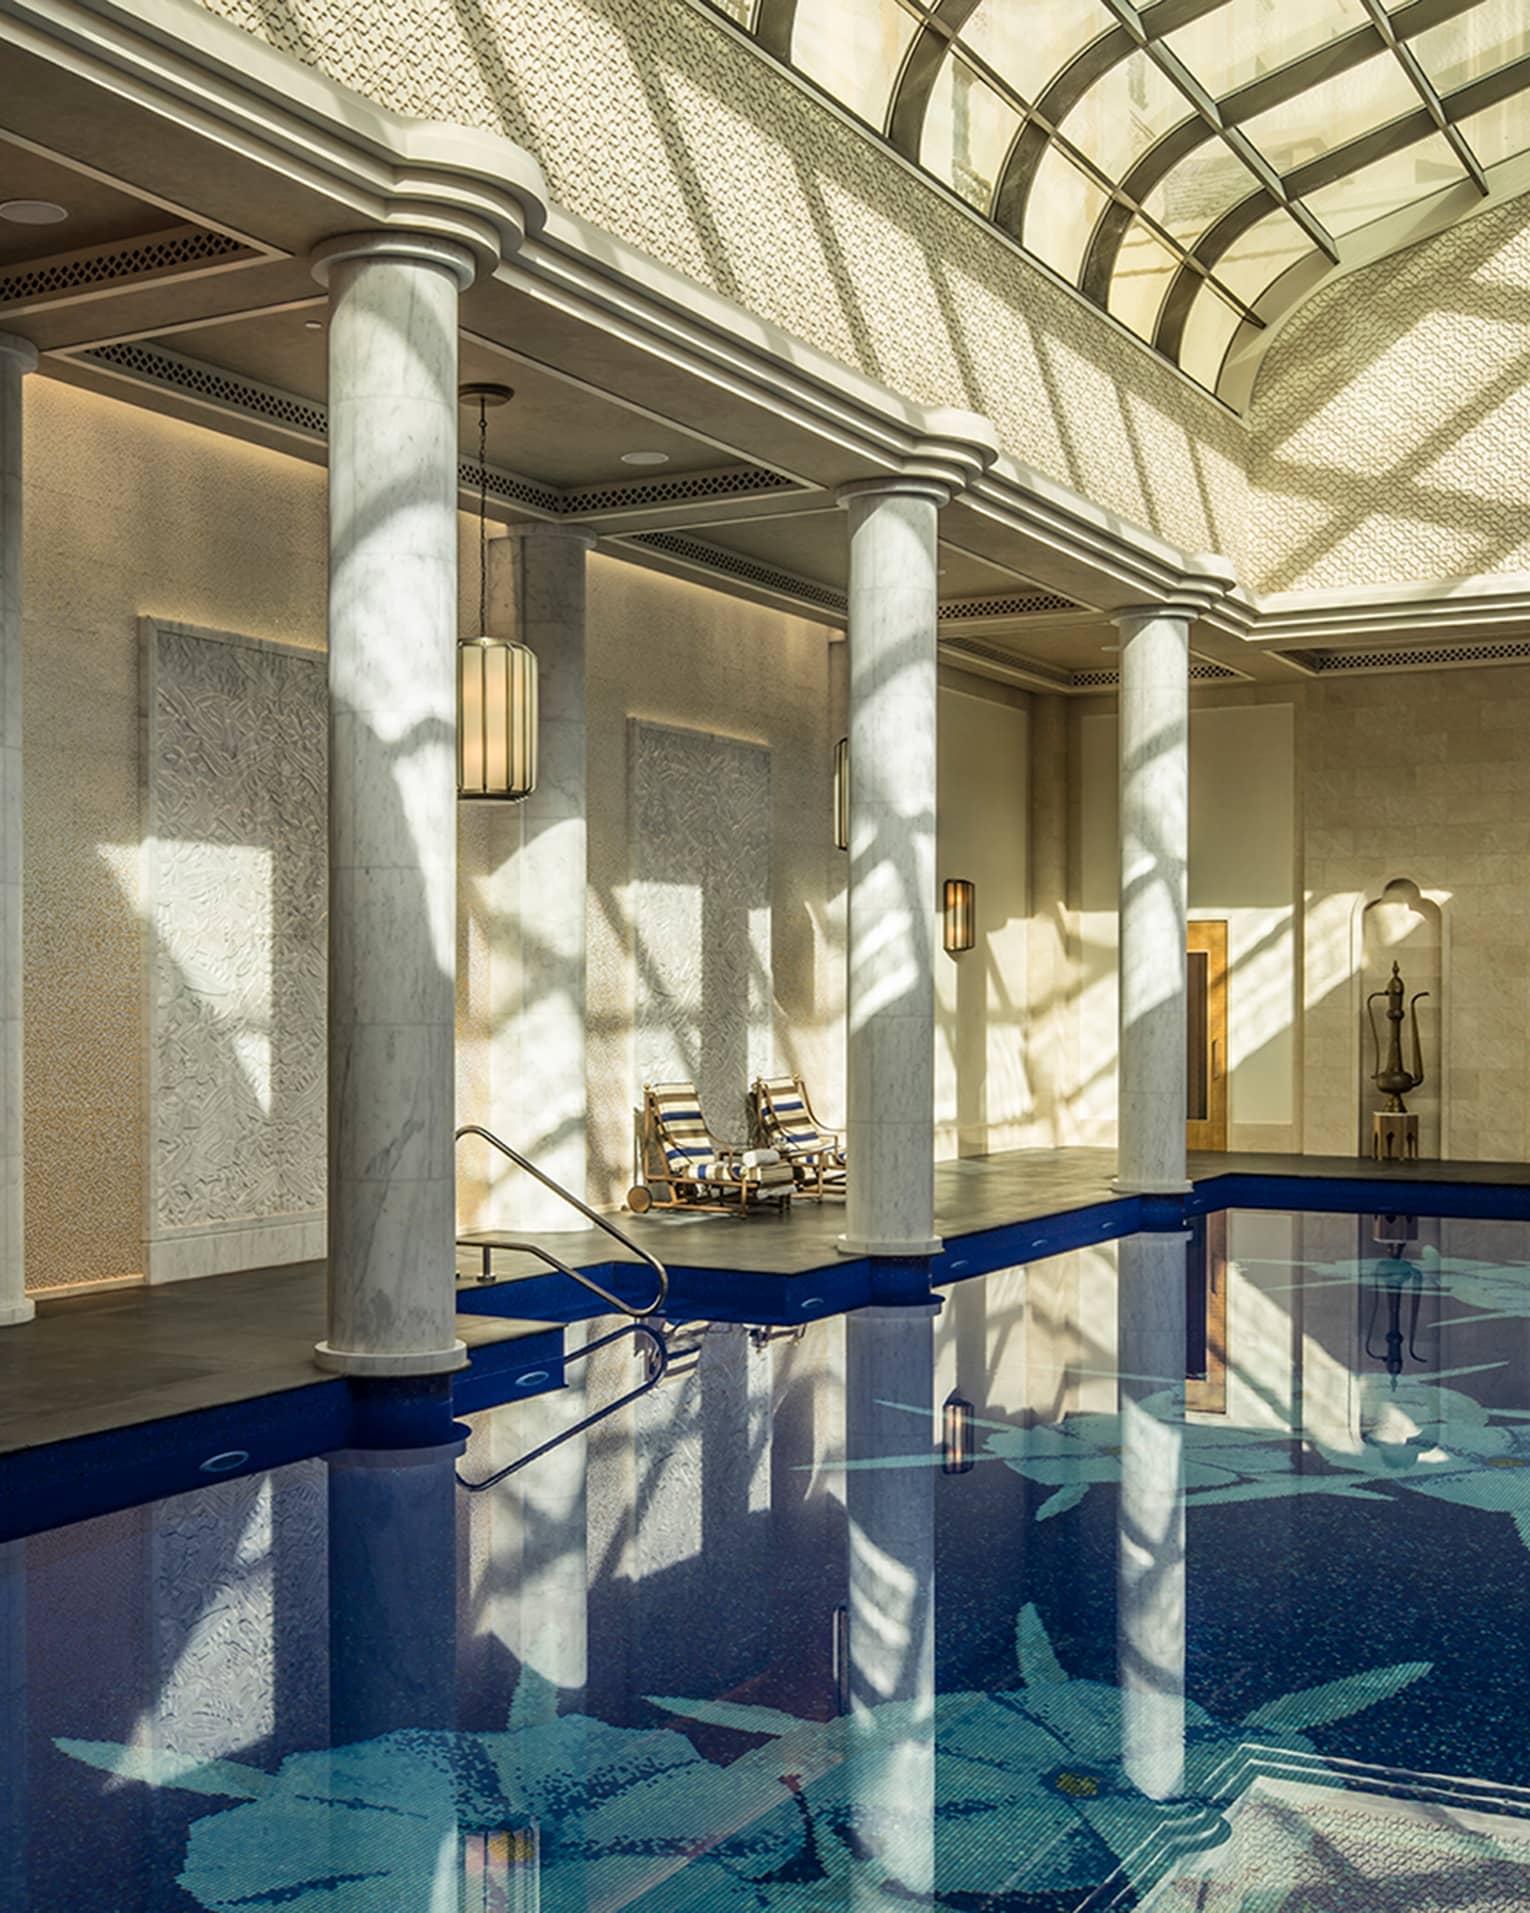 Long indoor swimming pool under curved skylights and tall white pillar columns